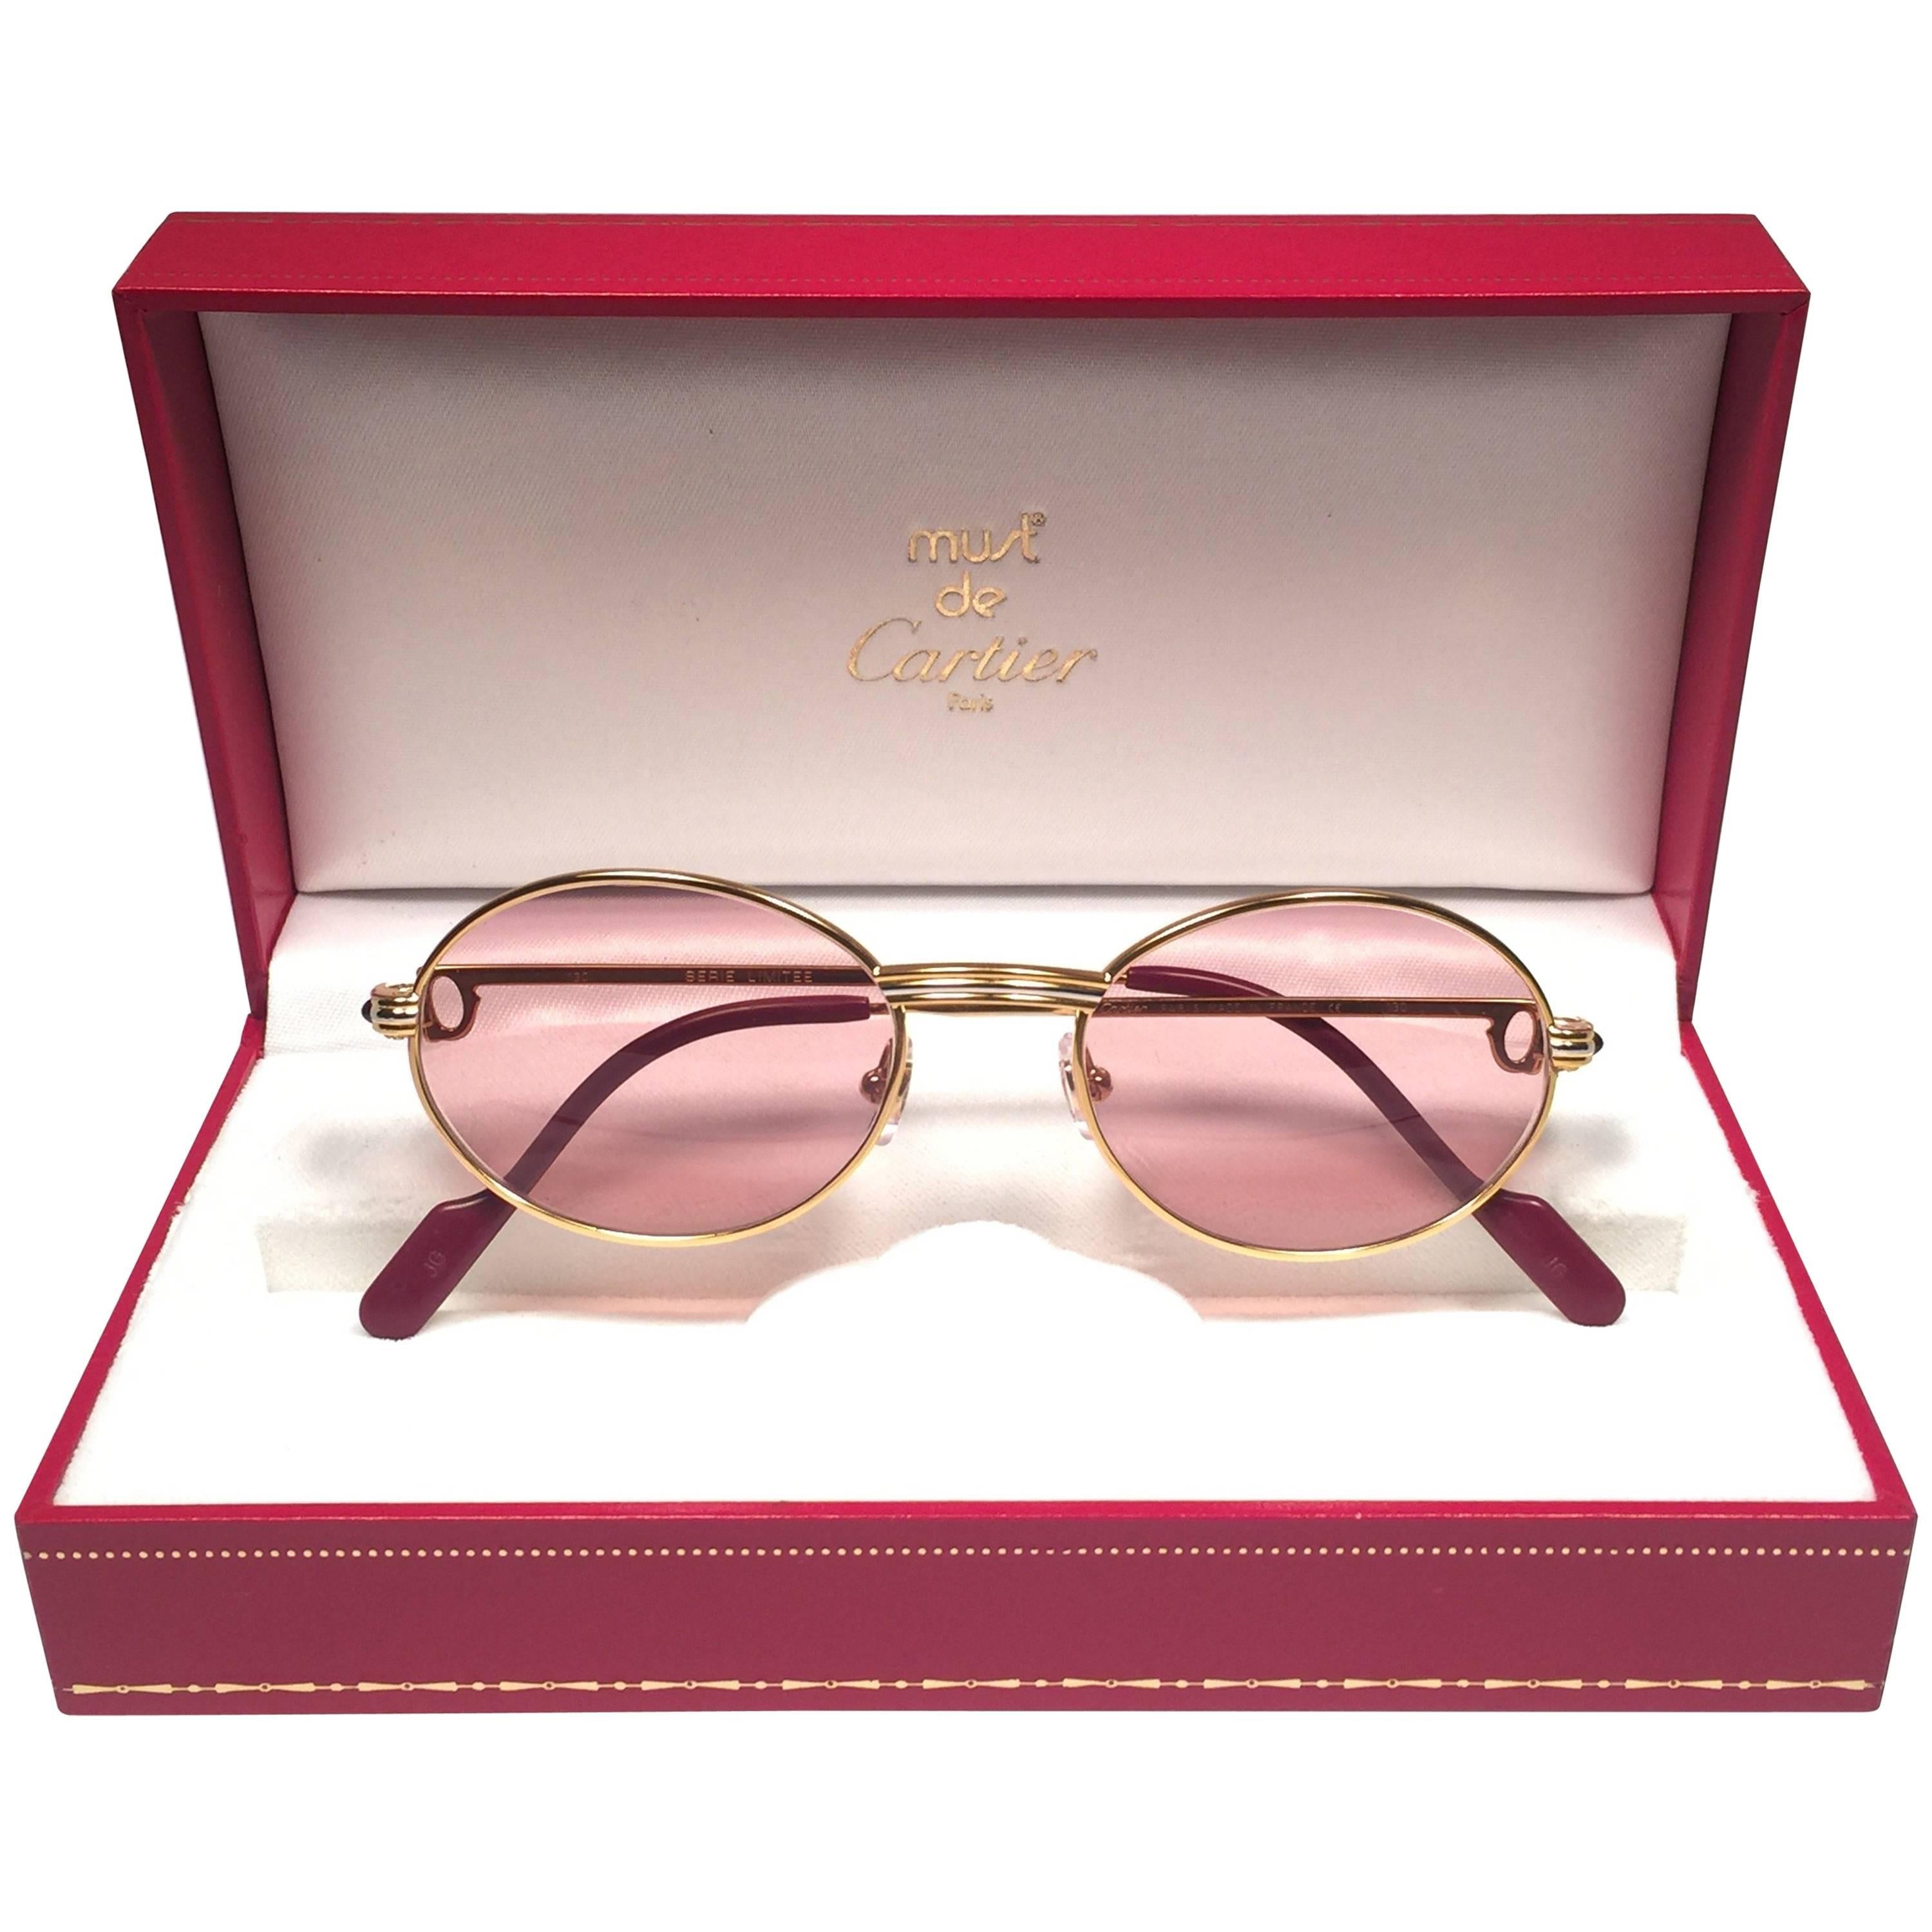 Cartier Oval St Honore Limited Series Ruby 49mm 18k Plated Sunglasses France